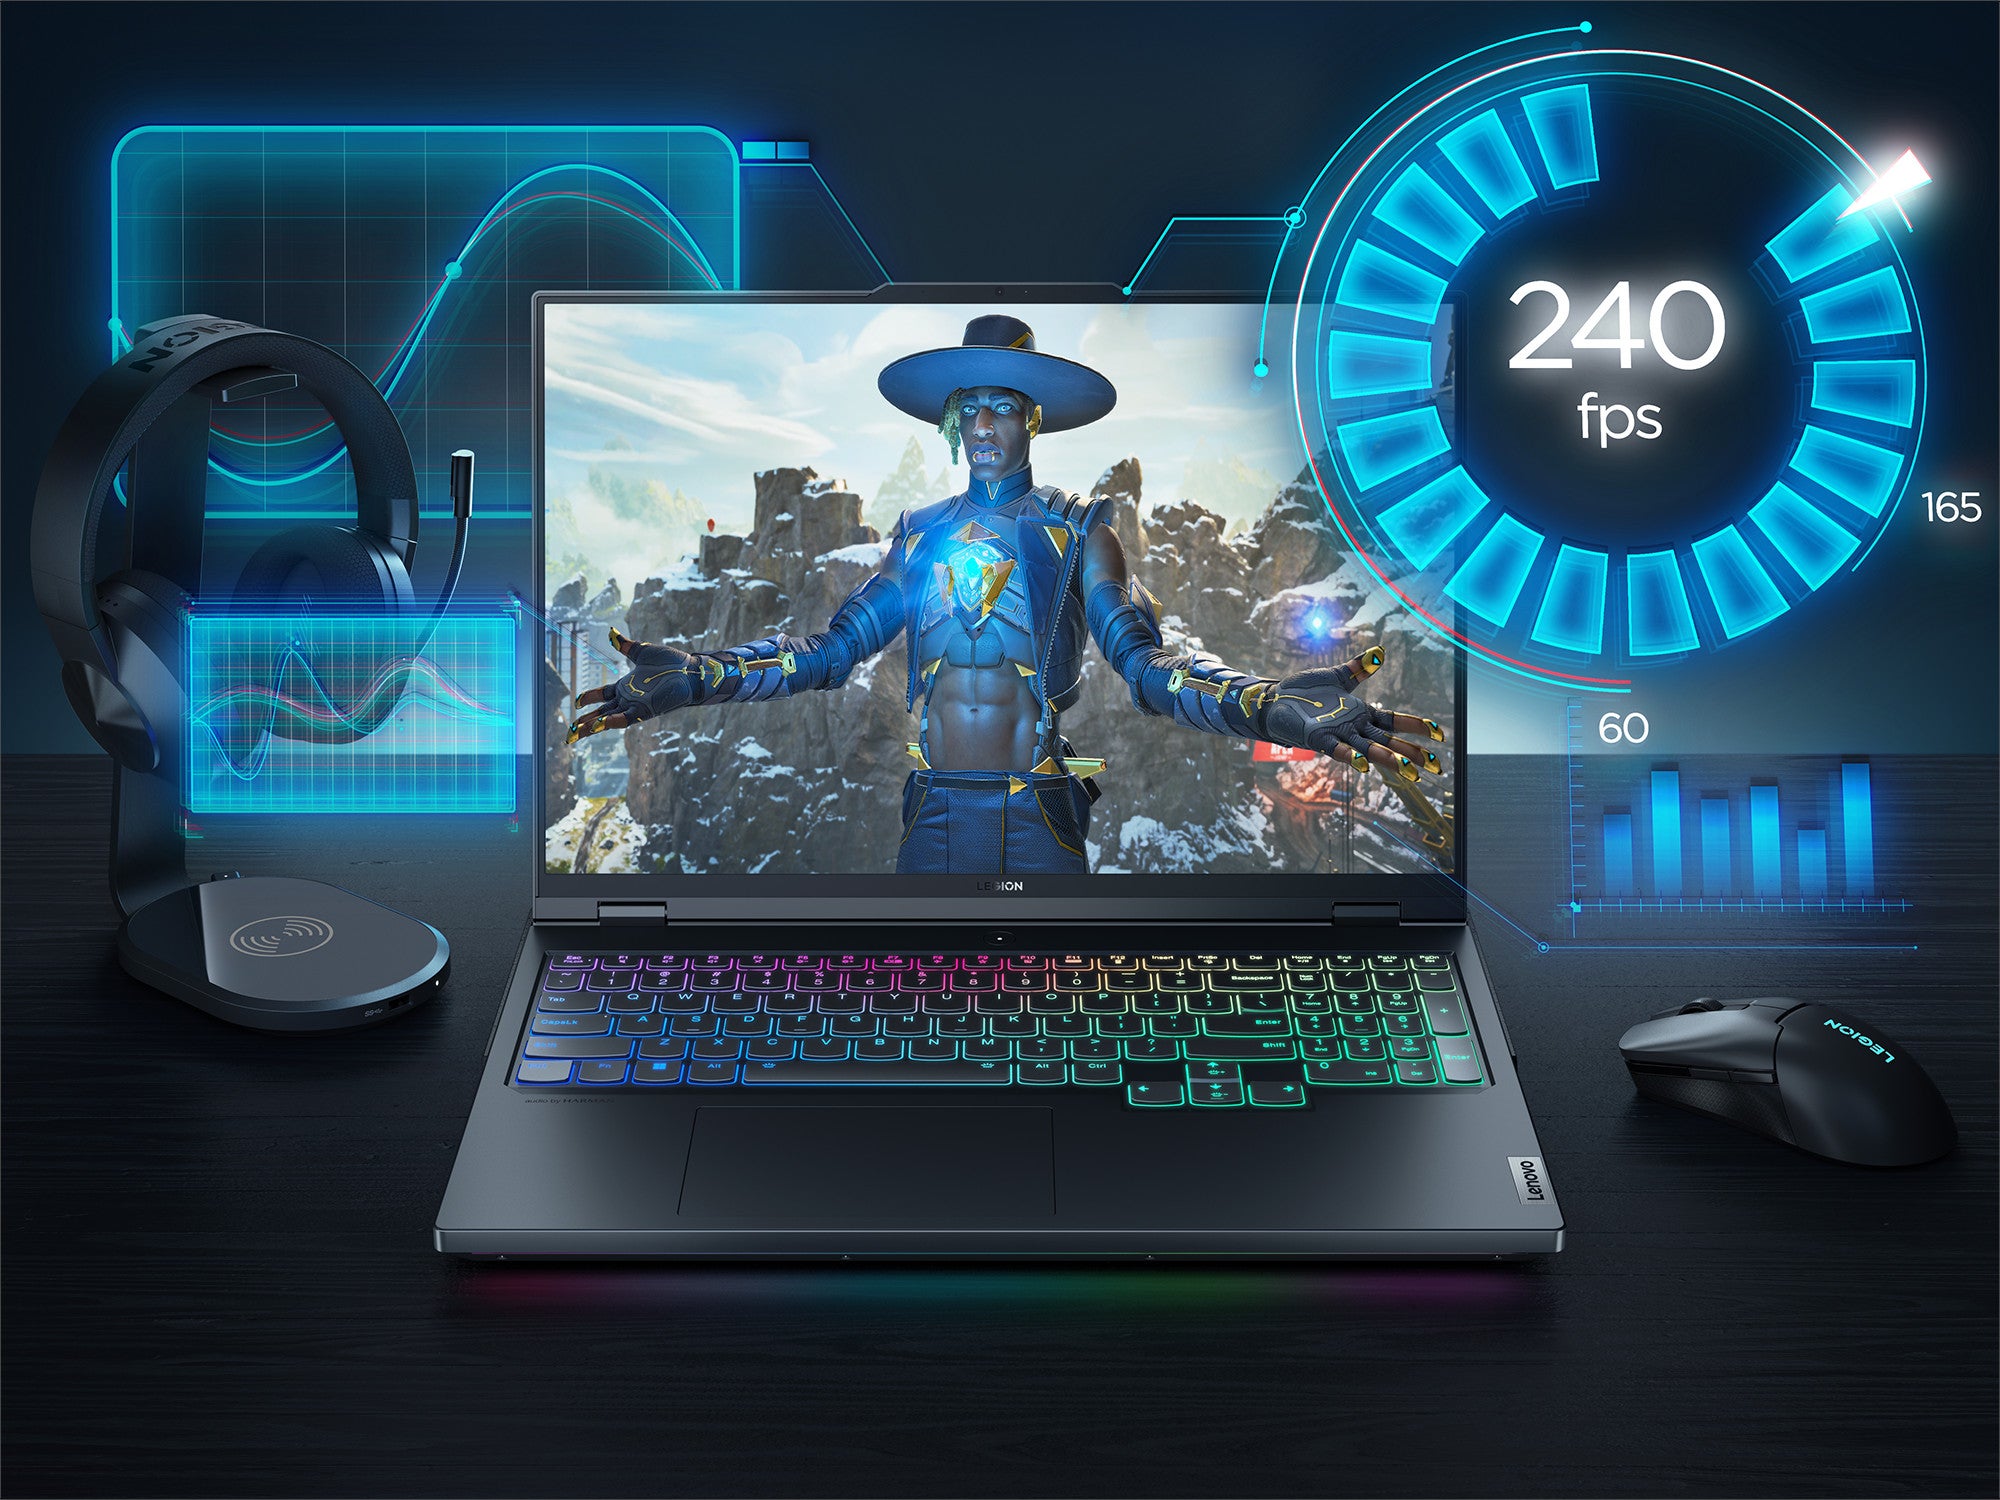 The new Legion Pro 7i is equipped with a 40 graphics card.